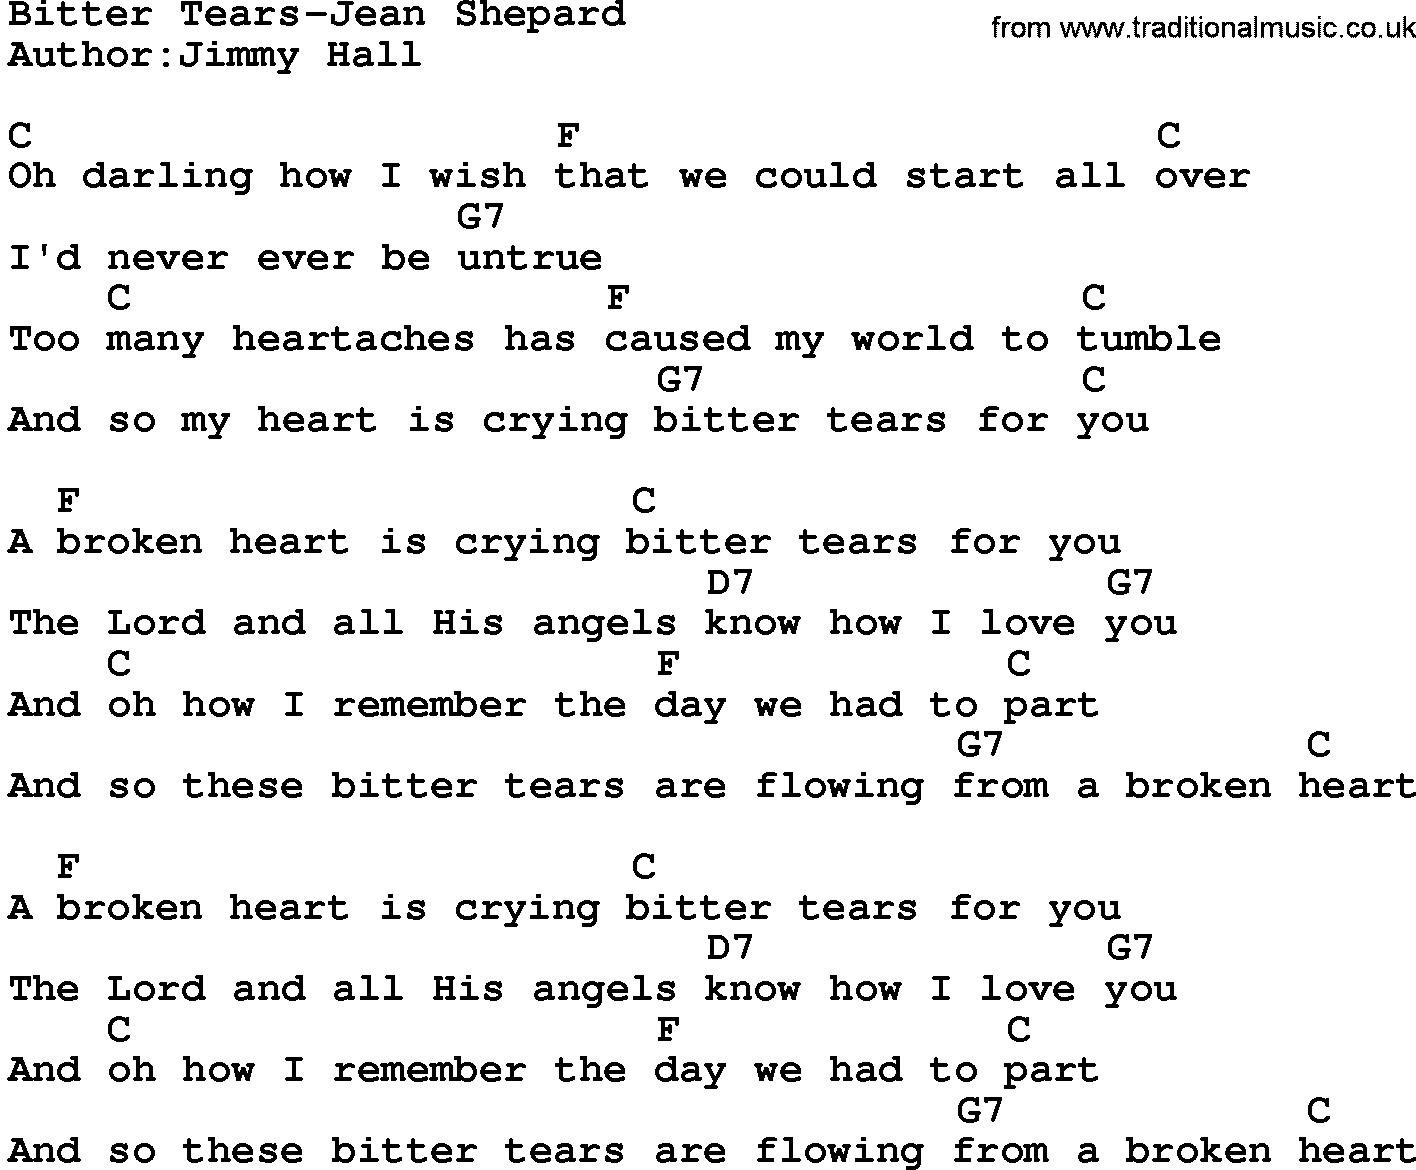 Country music song: Bitter Tears-Jean Shepard lyrics and chords